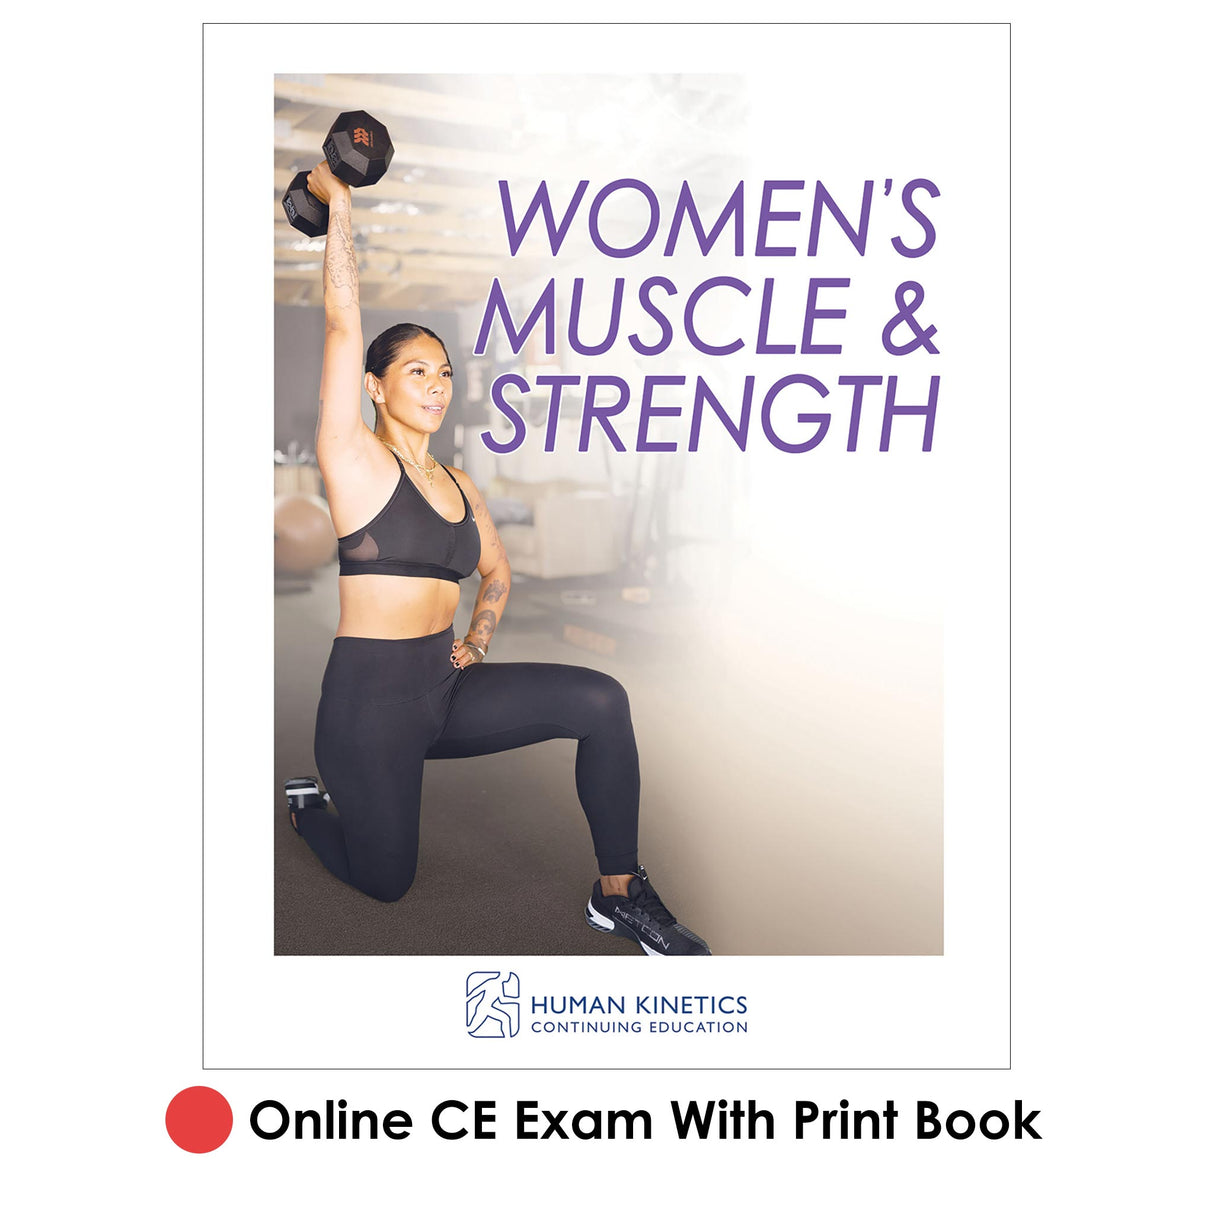 Women’s Muscle & Strength Online CE Exam With Print Book